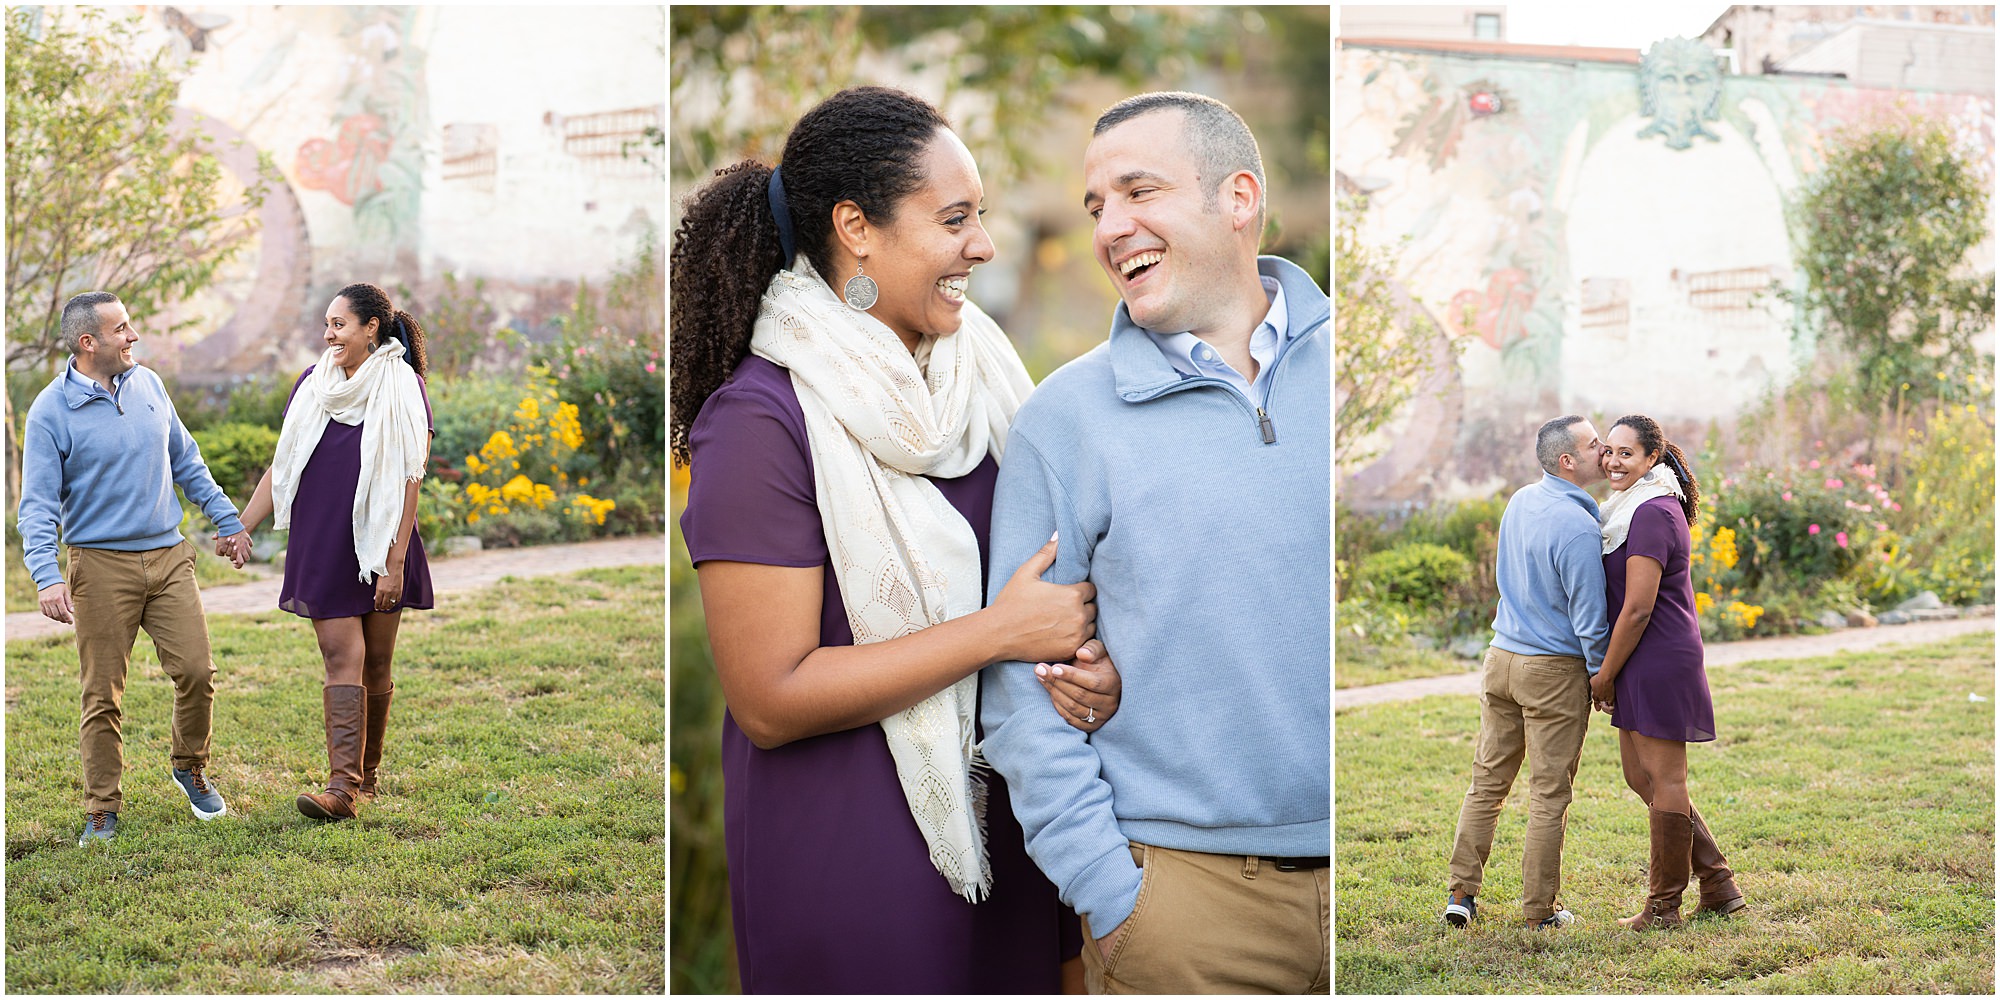 A Northern Liberties Engagement Session